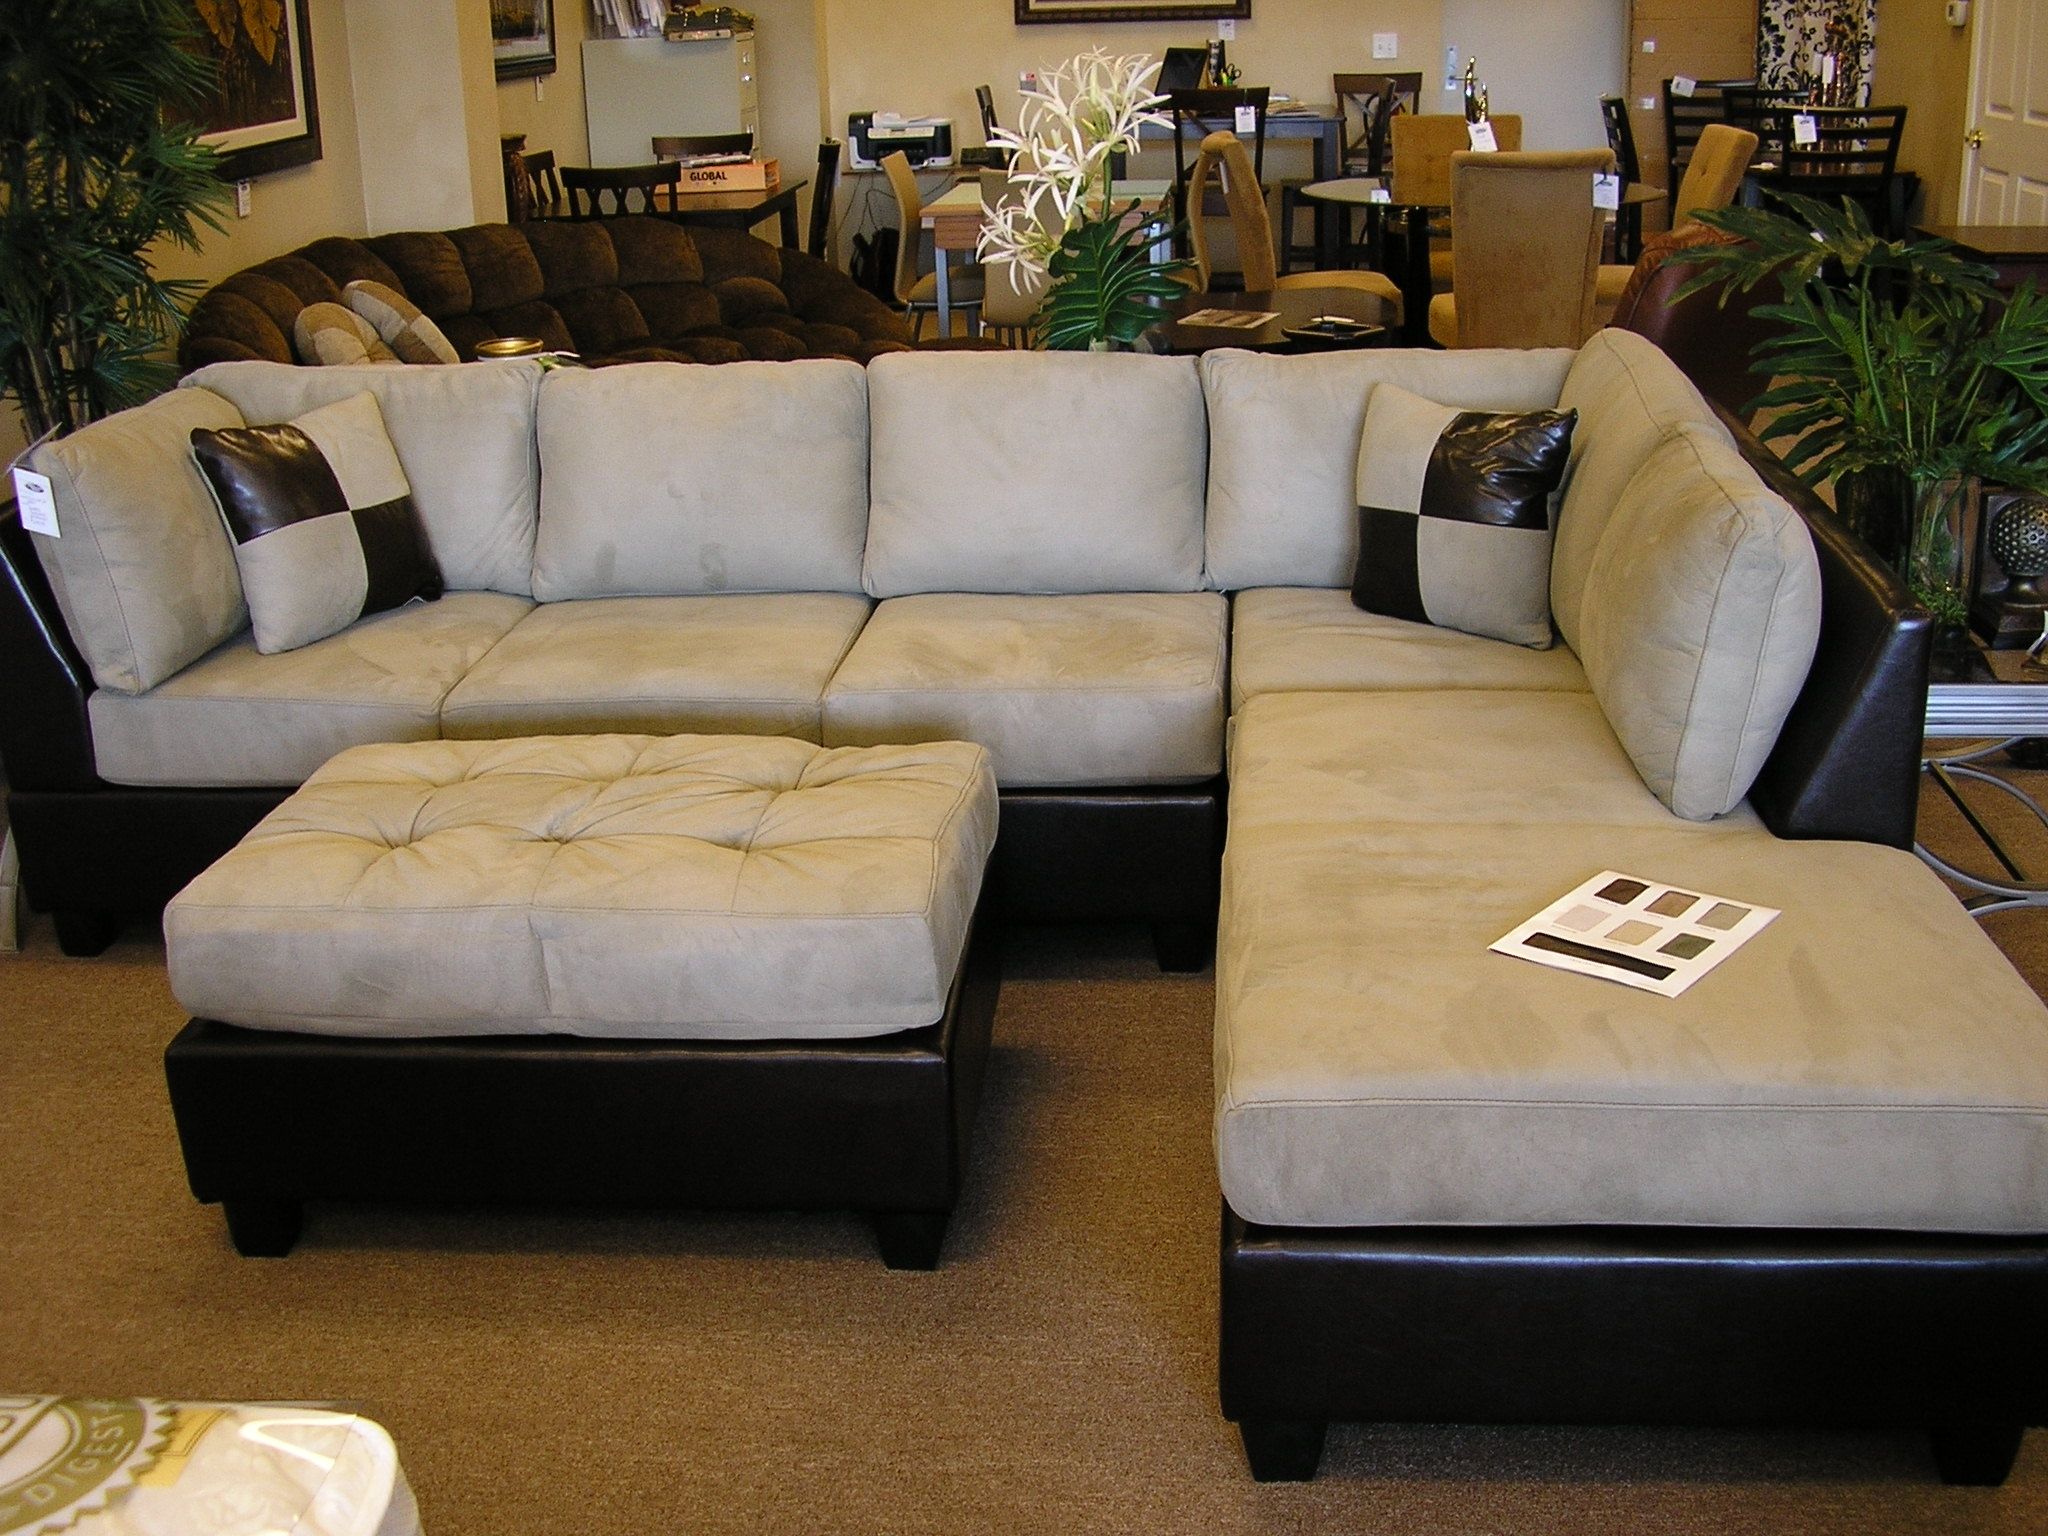 New Sectional Sofa With Chaise And Ottoman 74 On Stretch Slipcovers In Sectional Sofas With Chaise And Ottoman (Photo 4 of 15)